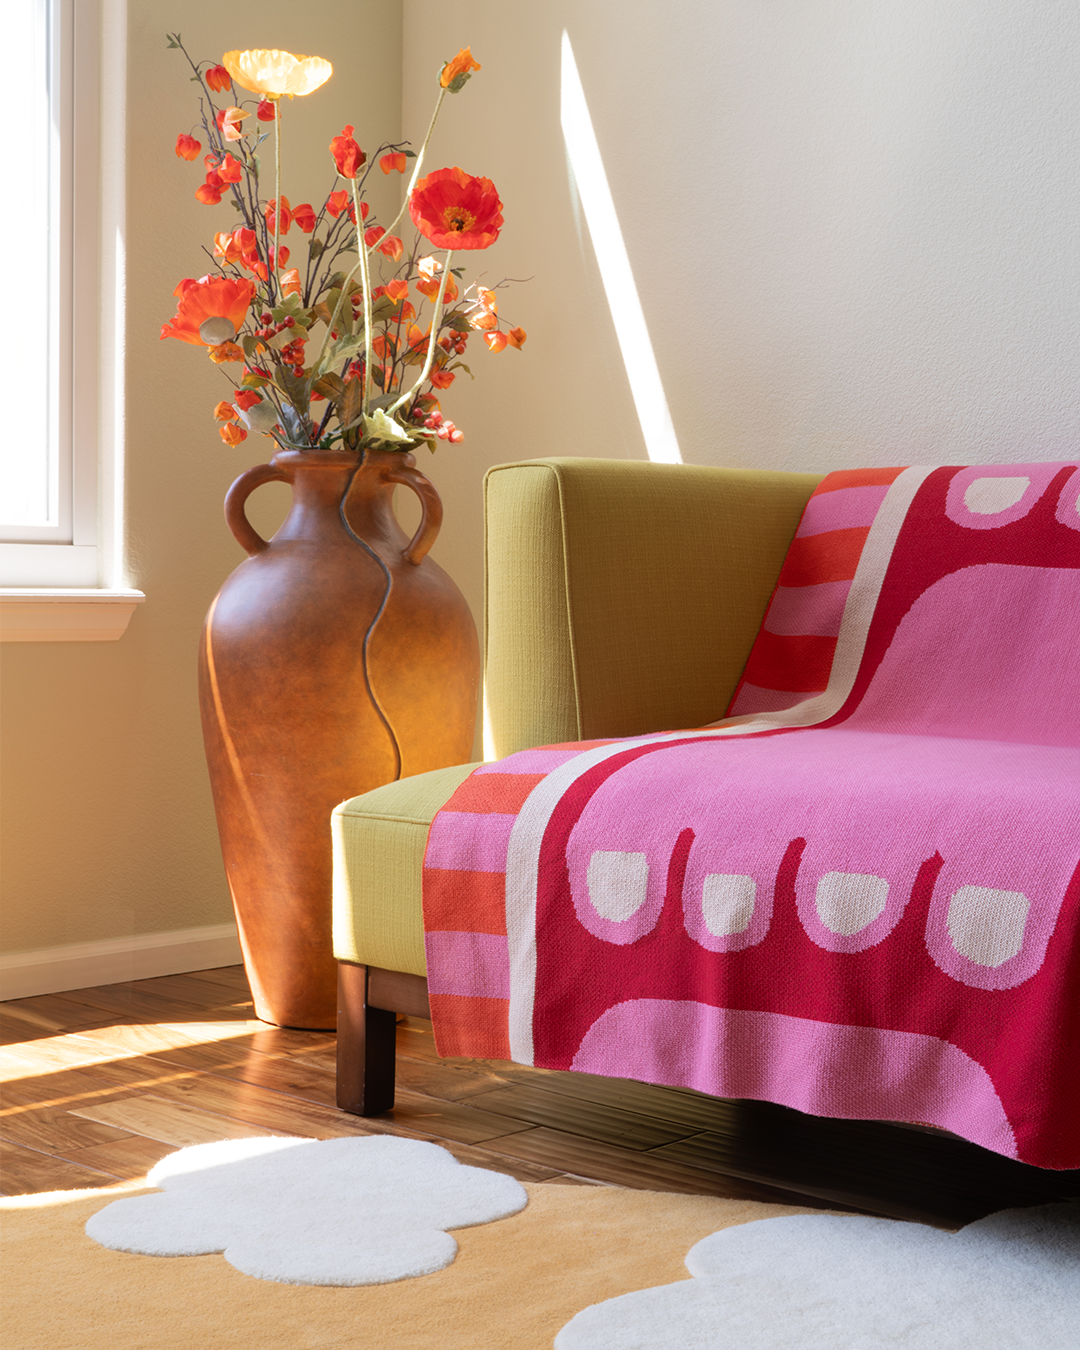 Photo of a living room with a pink and red blanket laying on the edge of a green couch. The pattern on the blanket looks like a pink foot on a red background with a striped border that is pink and orange.